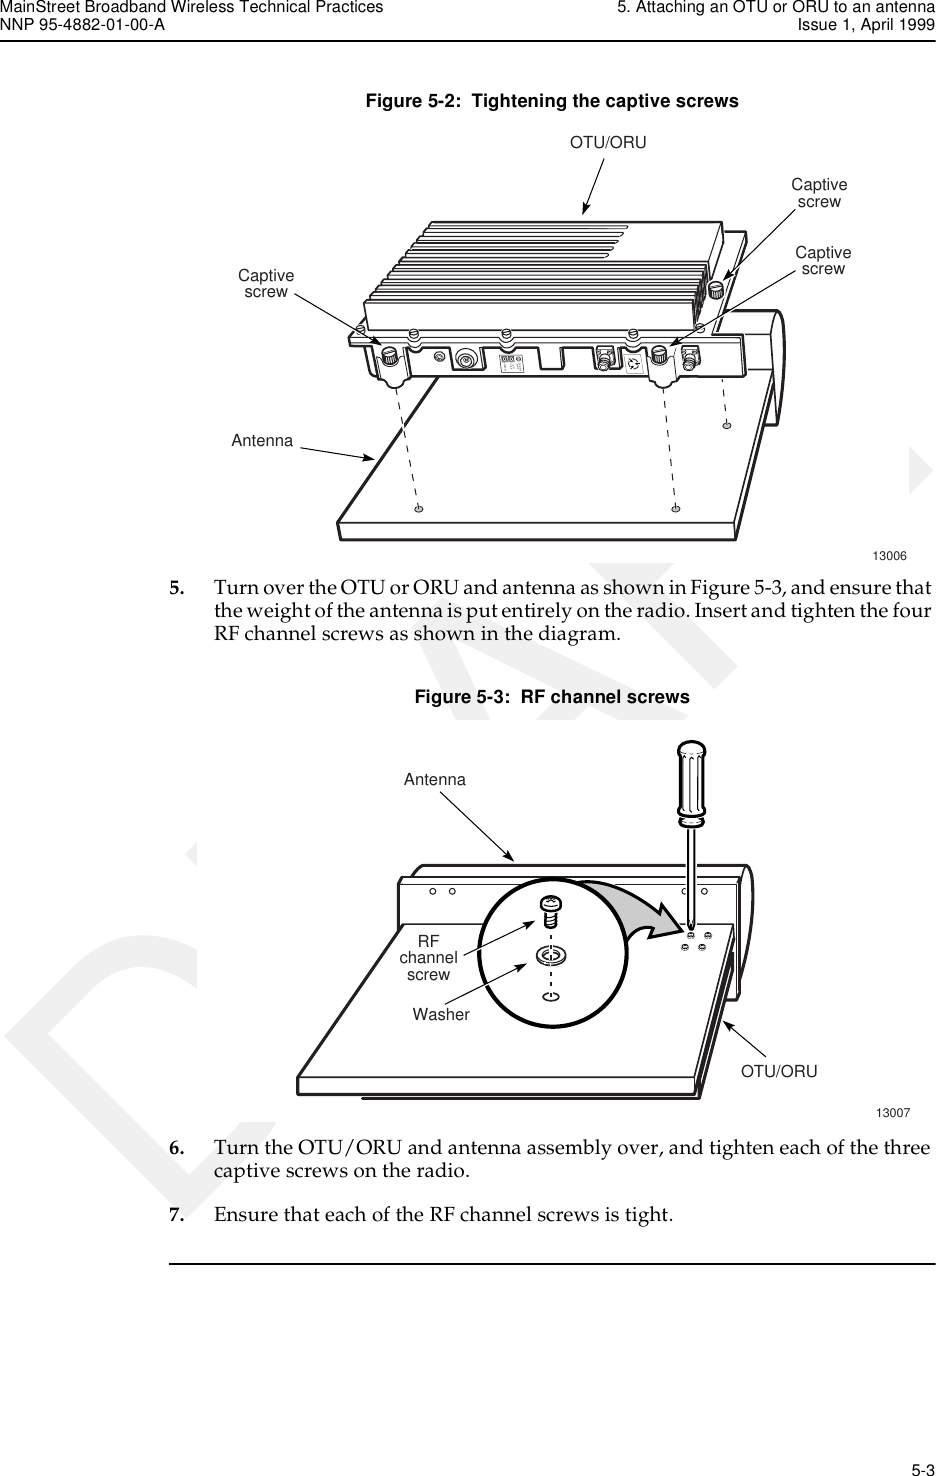 MainStreet Broadband Wireless Technical Practices 5. Attaching an OTU or ORU to an antennaNNP 95-4882-01-00-A Issue 1, April 1999   5-3DRAFTFigure 5-2:  Tightening the captive screws5. Turn over the OTU or ORU and antenna as shown in Figure 5-3, and ensure that the weight of the antenna is put entirely on the radio. Insert and tighten the four RF channel screws as shown in the diagram.Figure 5-3:  RF channel screws6. Turn the OTU/ORU and antenna assembly over, and tighten each of the three captive screws on the radio.7. Ensure that each of the RF channel screws is tight.13006100 MhzIF &amp;-48 VRS-422DataCaptivescrewAntennaOTU/ORUCaptivescrewCaptivescrewAntenna13007RFchannelscrewWasherOTU/ORU